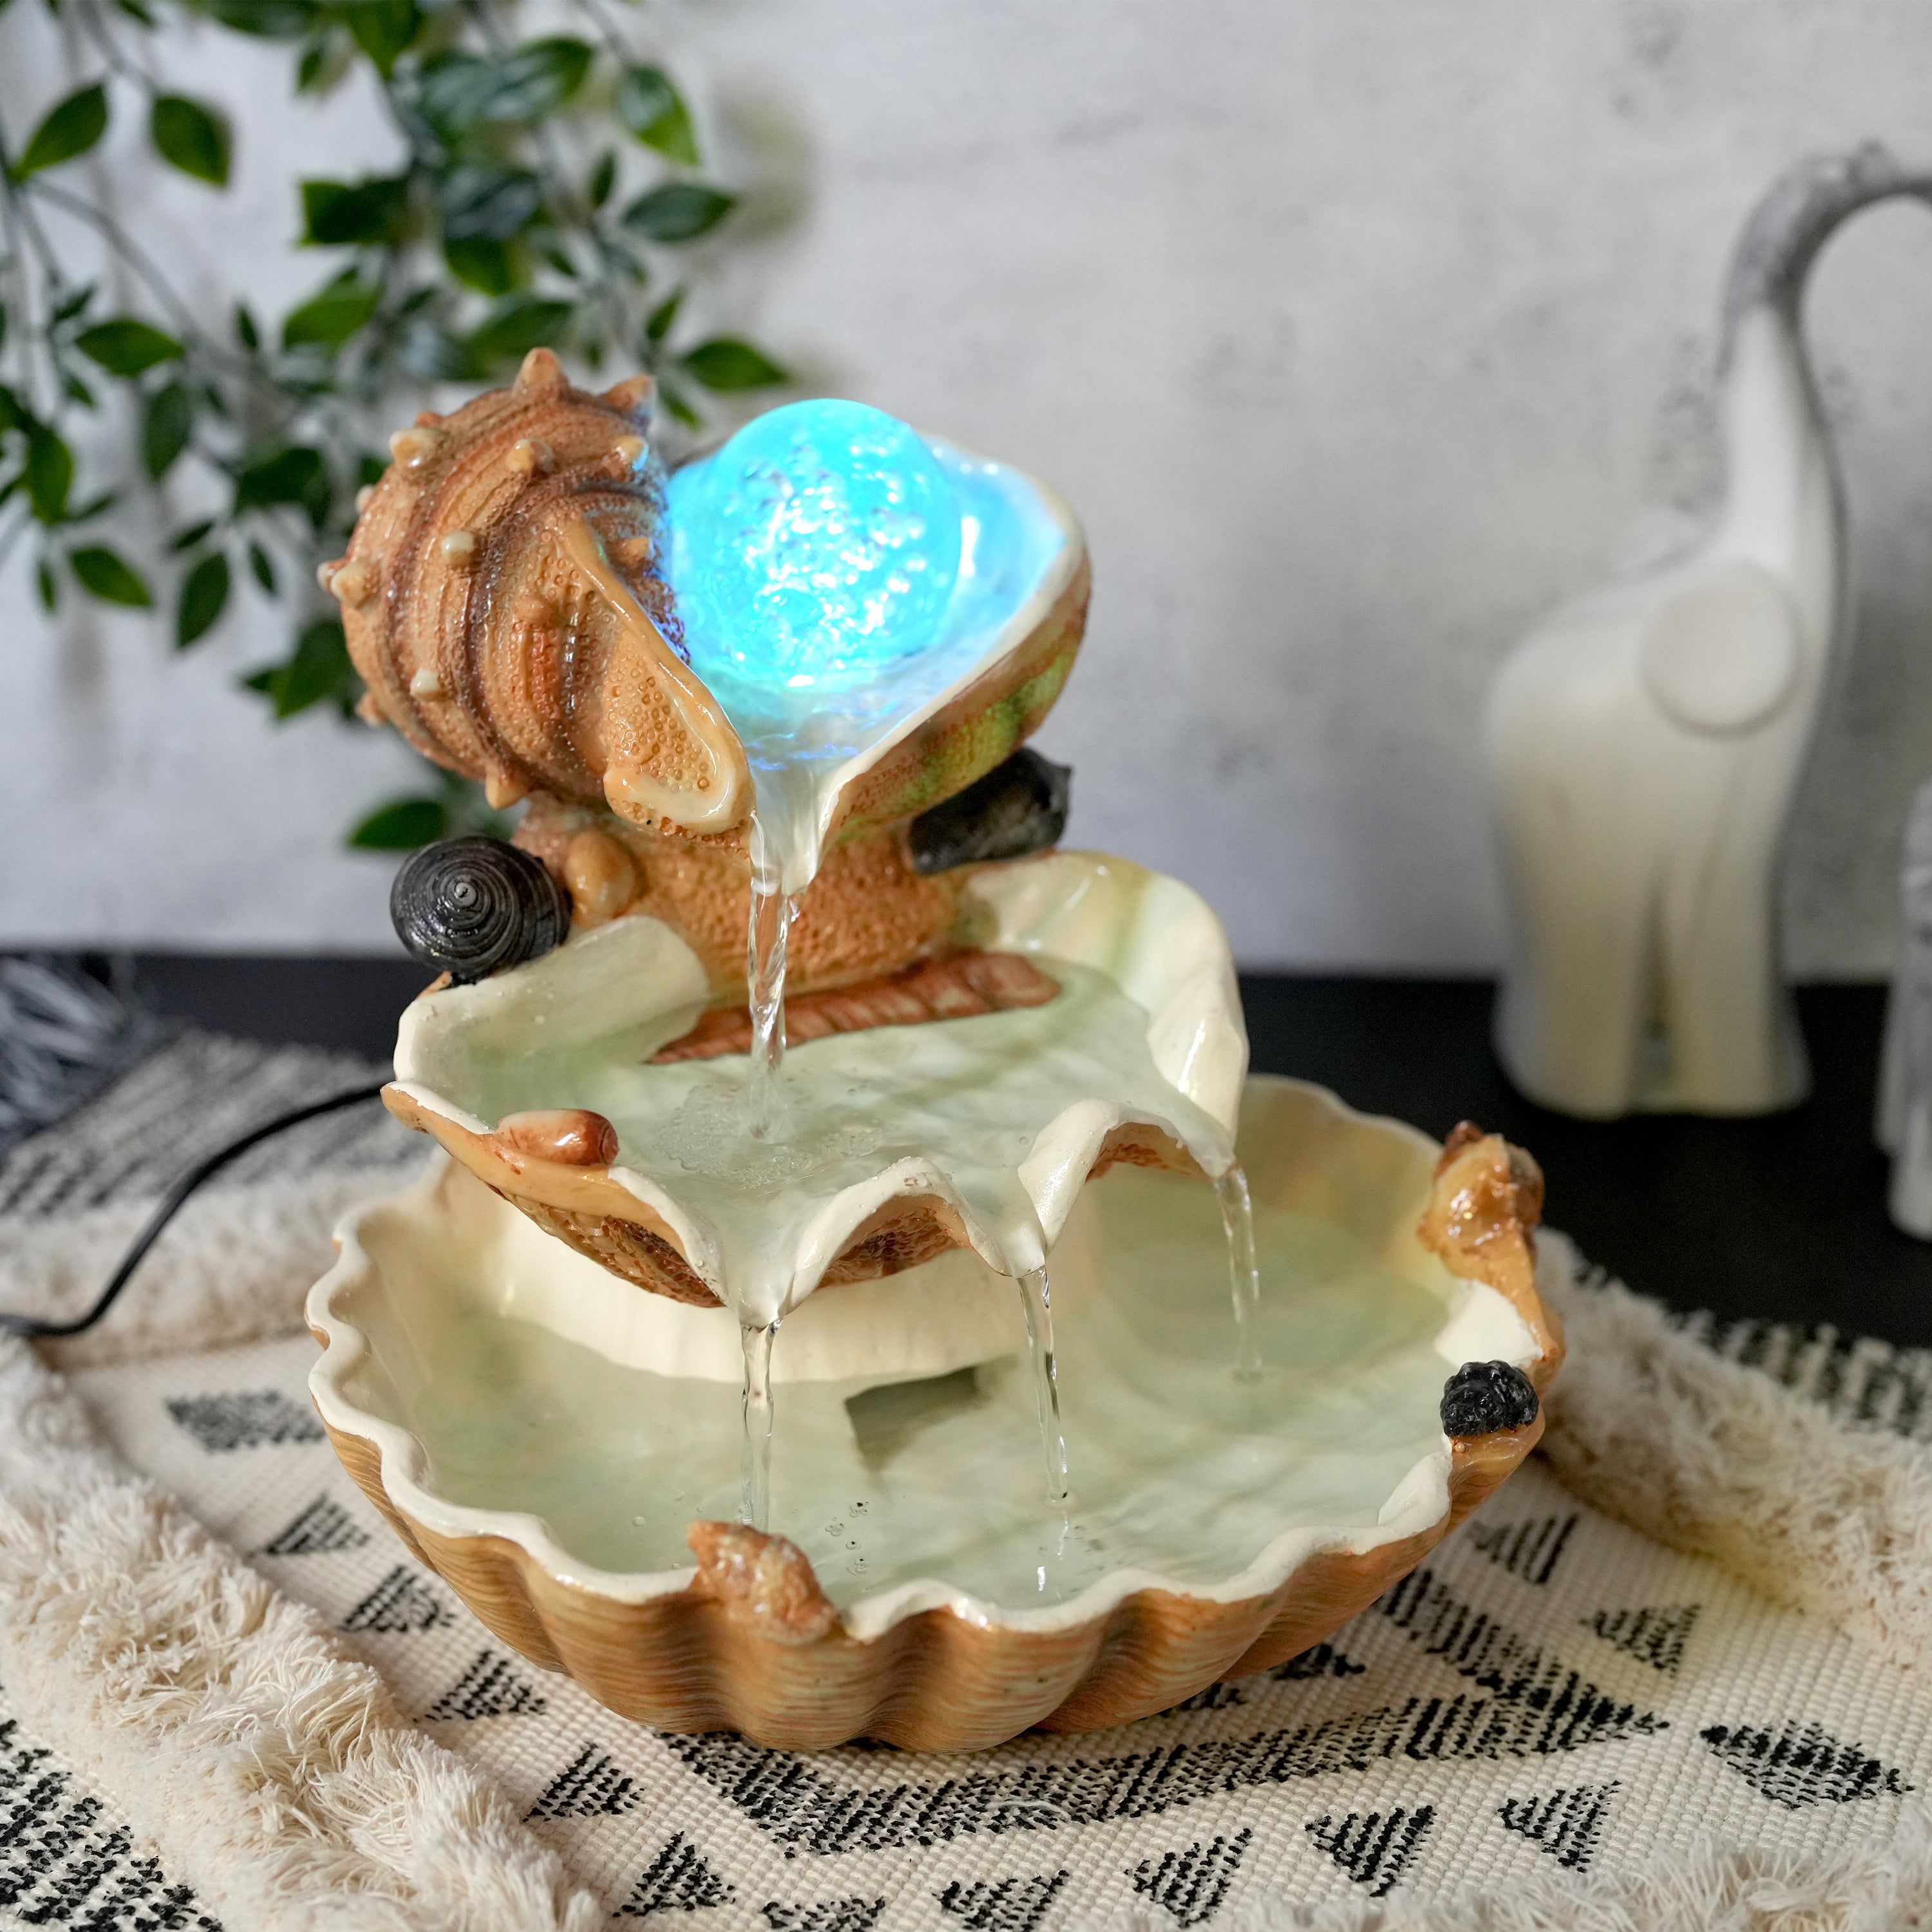 Clam Shell Water Feature Led Lights GEEZY - The Magic Toy Shop